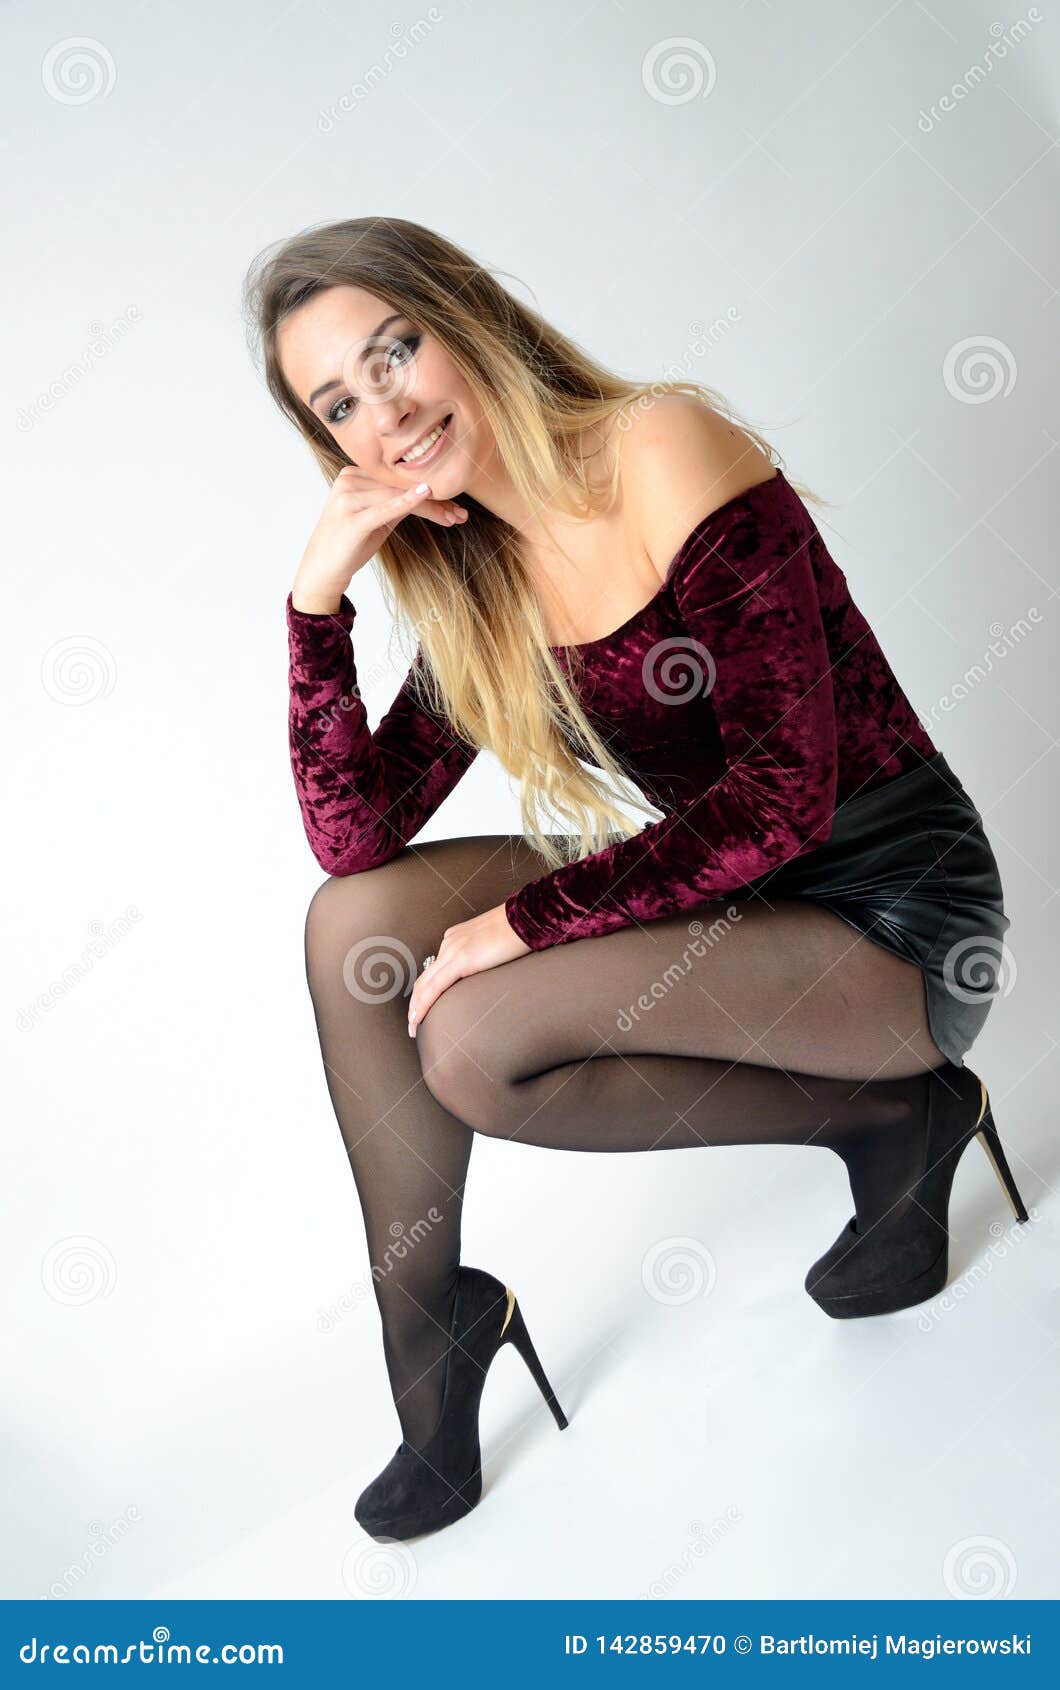 761 Girl Stockings Shorts Stock Photos - Free & Royalty-Free Stock Photos  from Dreamstime